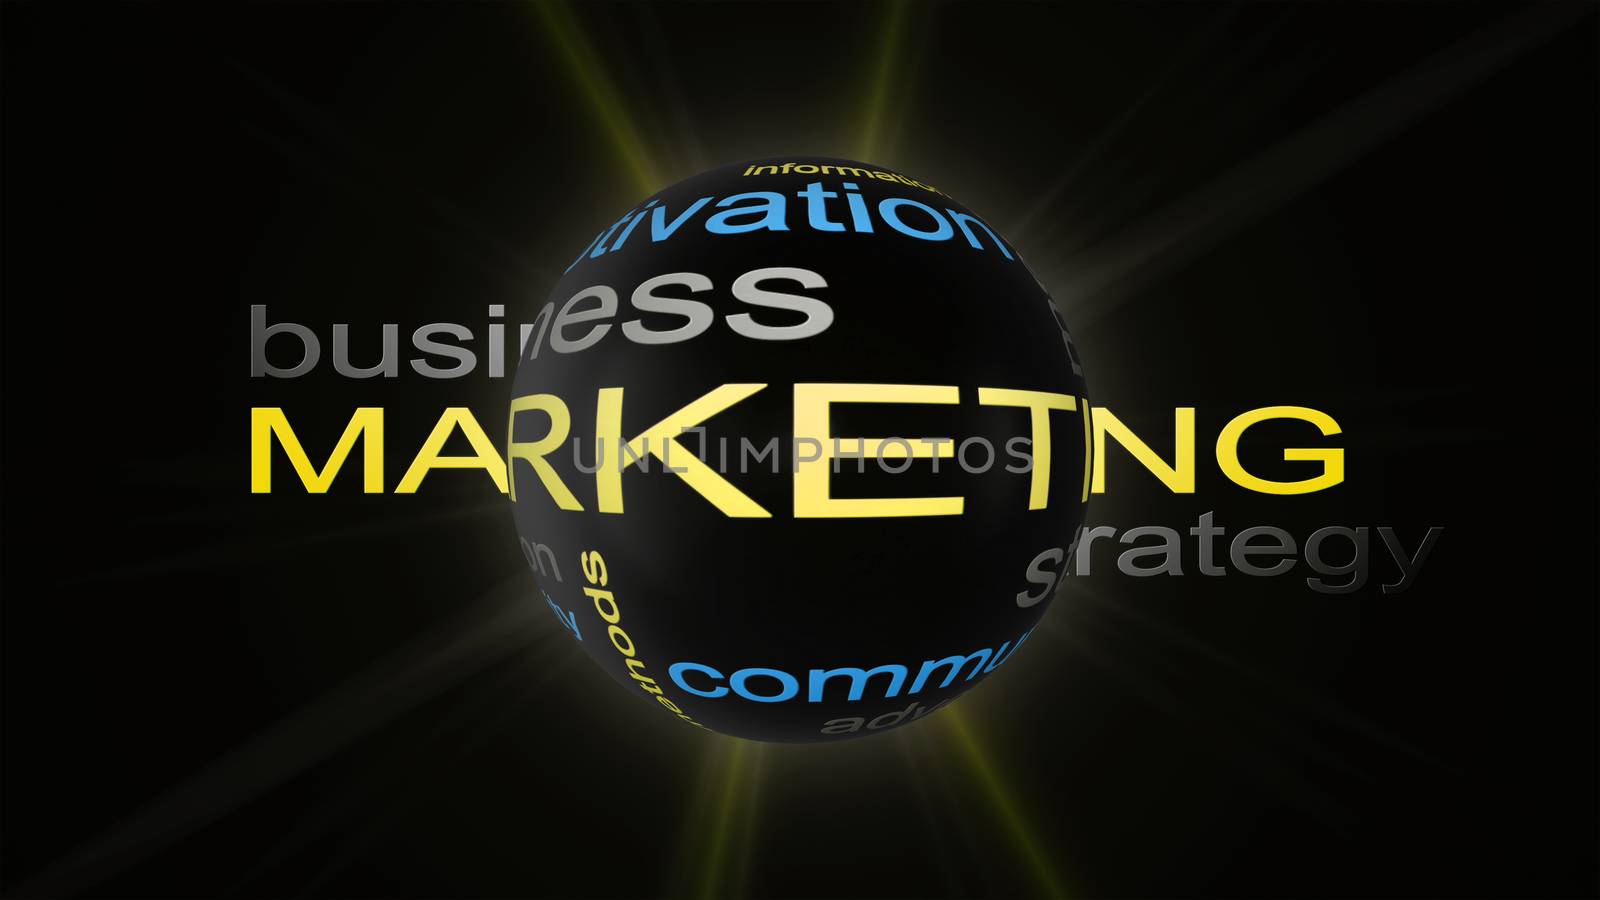 Marketing Business Strategy Word Cloud Text Concept by alexandarilich